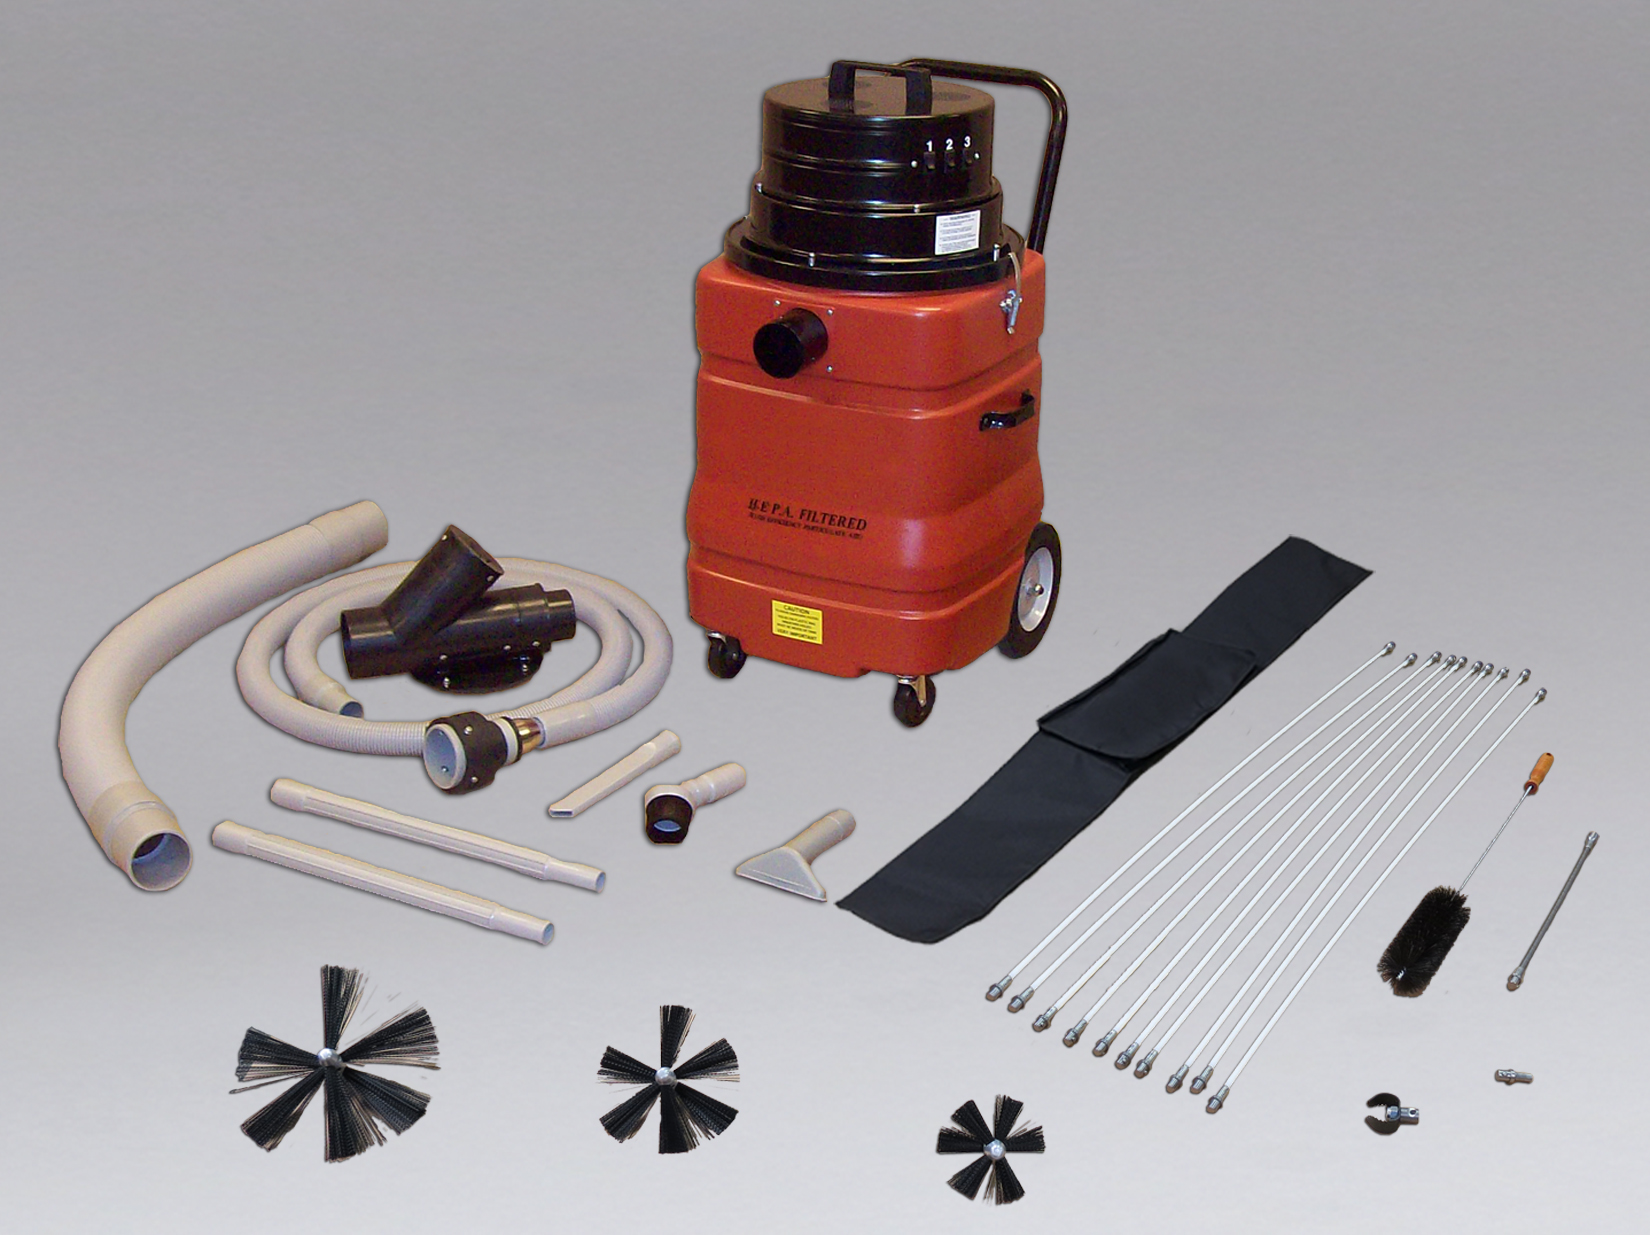 Dryer Vent Cleaning Equipment With Tool Kit & Rotary Brush Kit